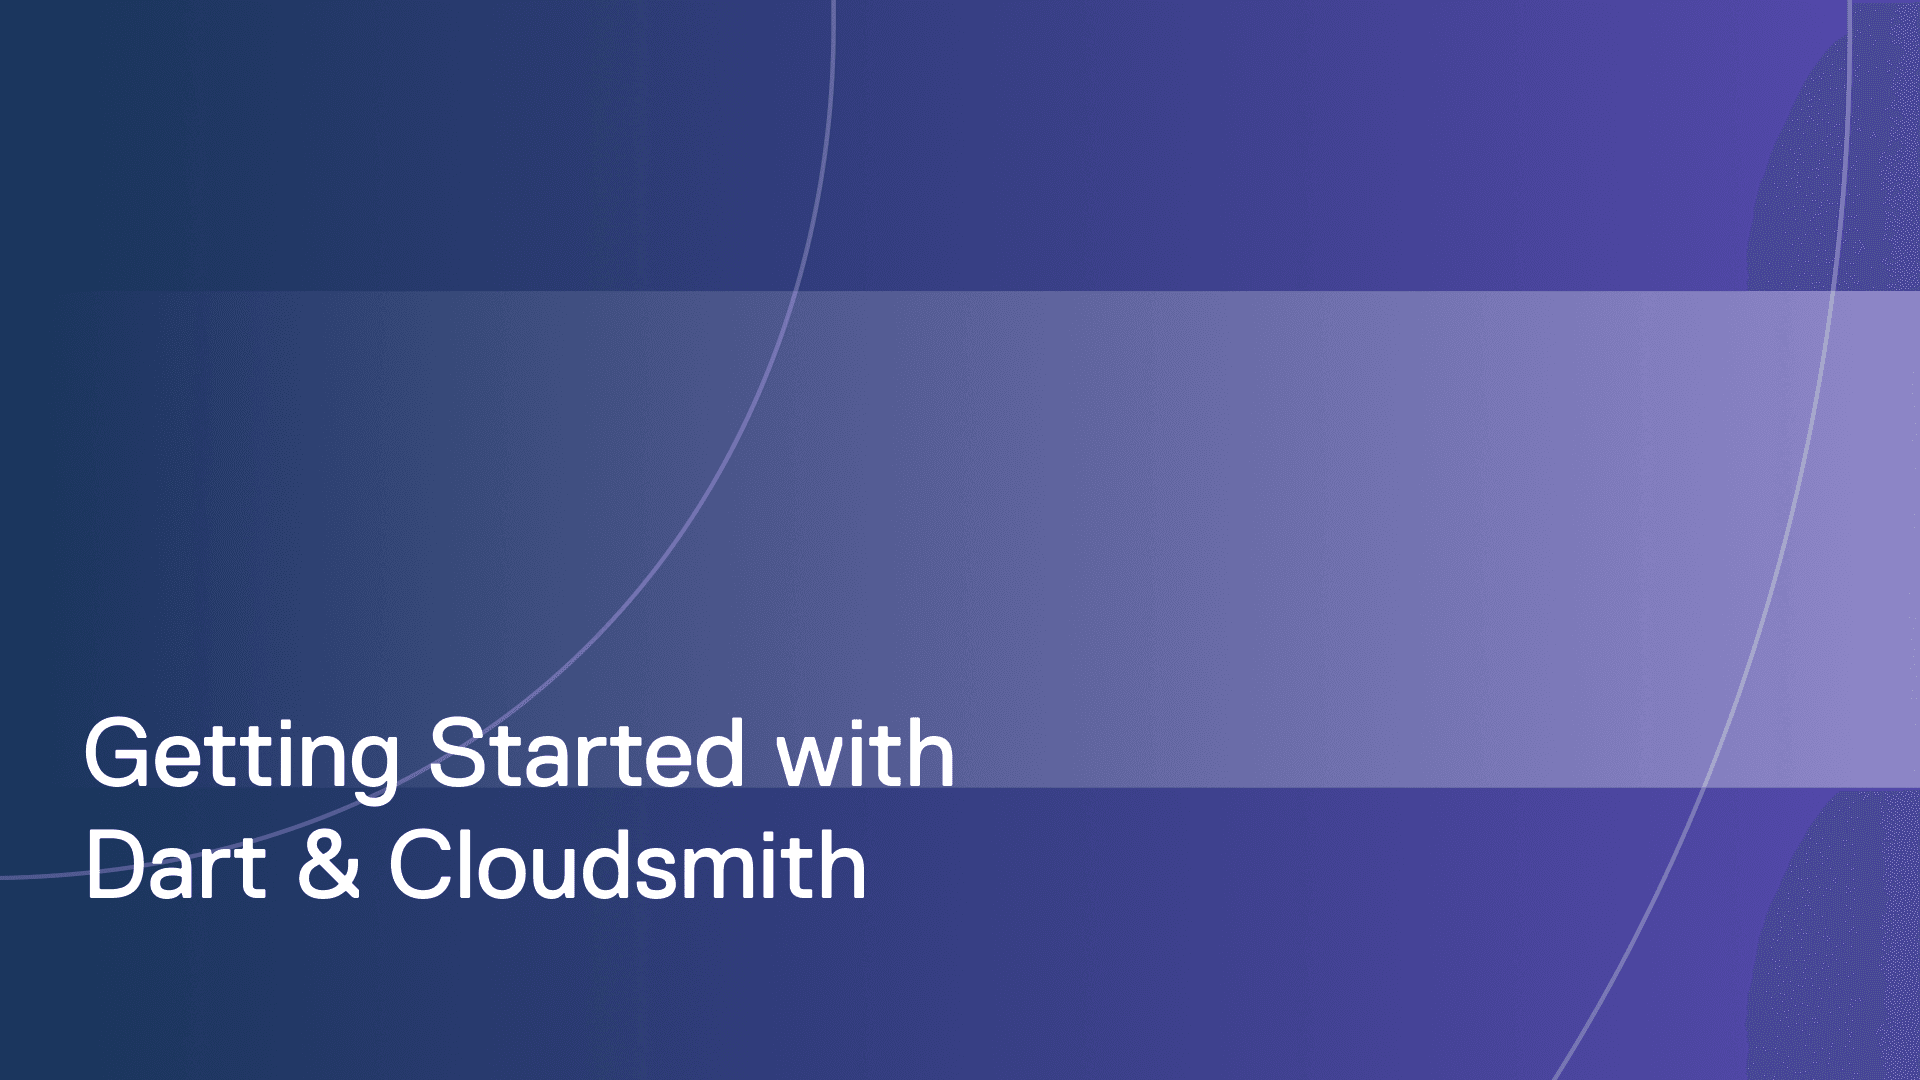 Getting started with Dart and Cloudsmith